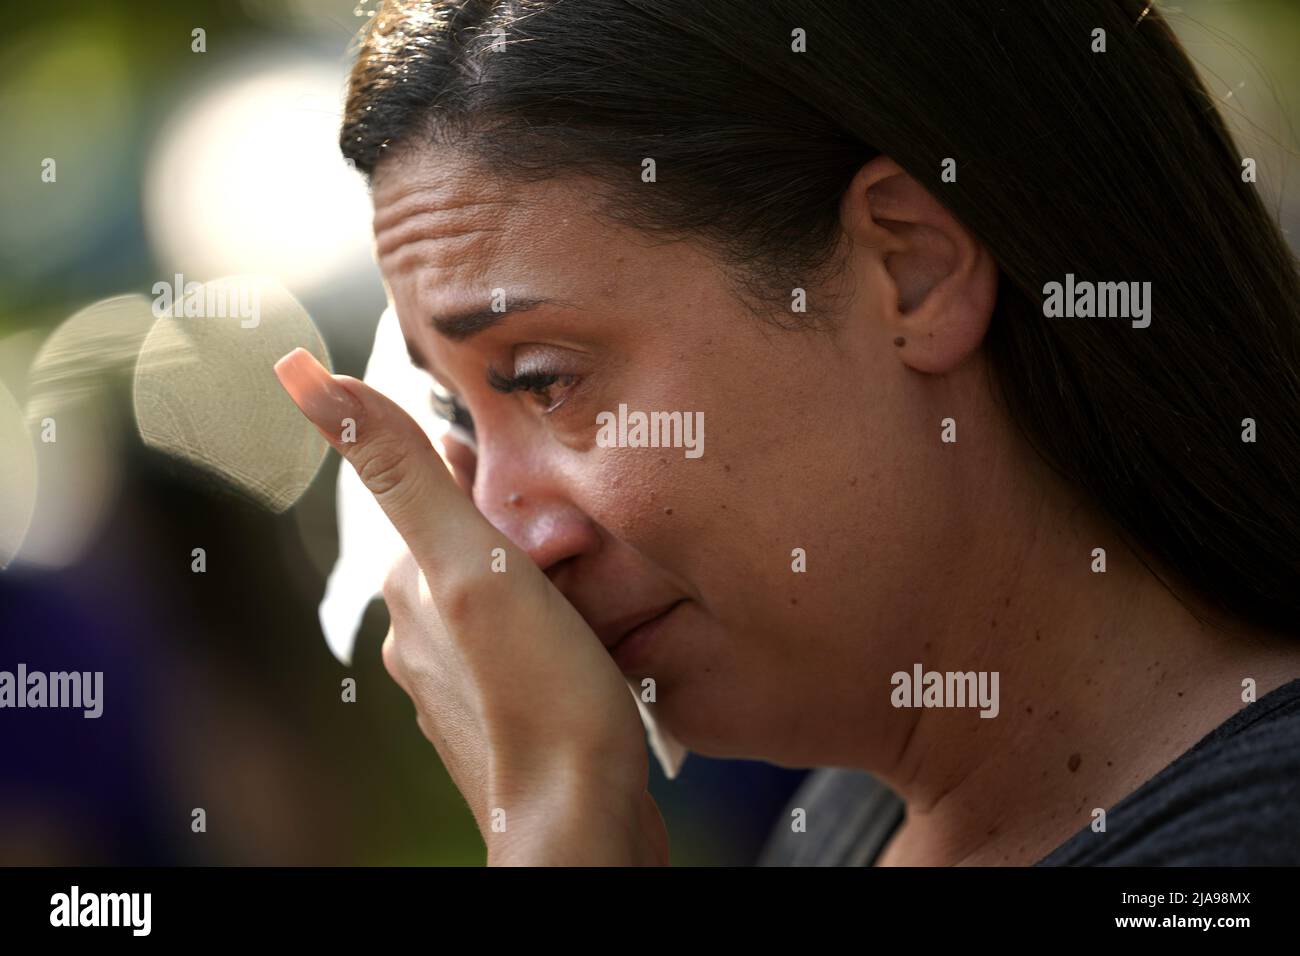 Uvalde, USA. 28th May, 2022. A woman mourns for victims of a school mass shooting at Town Square in Uvalde, Texas, the United States, May 28, 2022. At least 19 children and two adults were killed in a shooting at Robb Elementary School in the town of Uvalde, Texas, on Tuesday. Credit: Wu Xiaoling/Xinhua/Alamy Live News Stock Photo